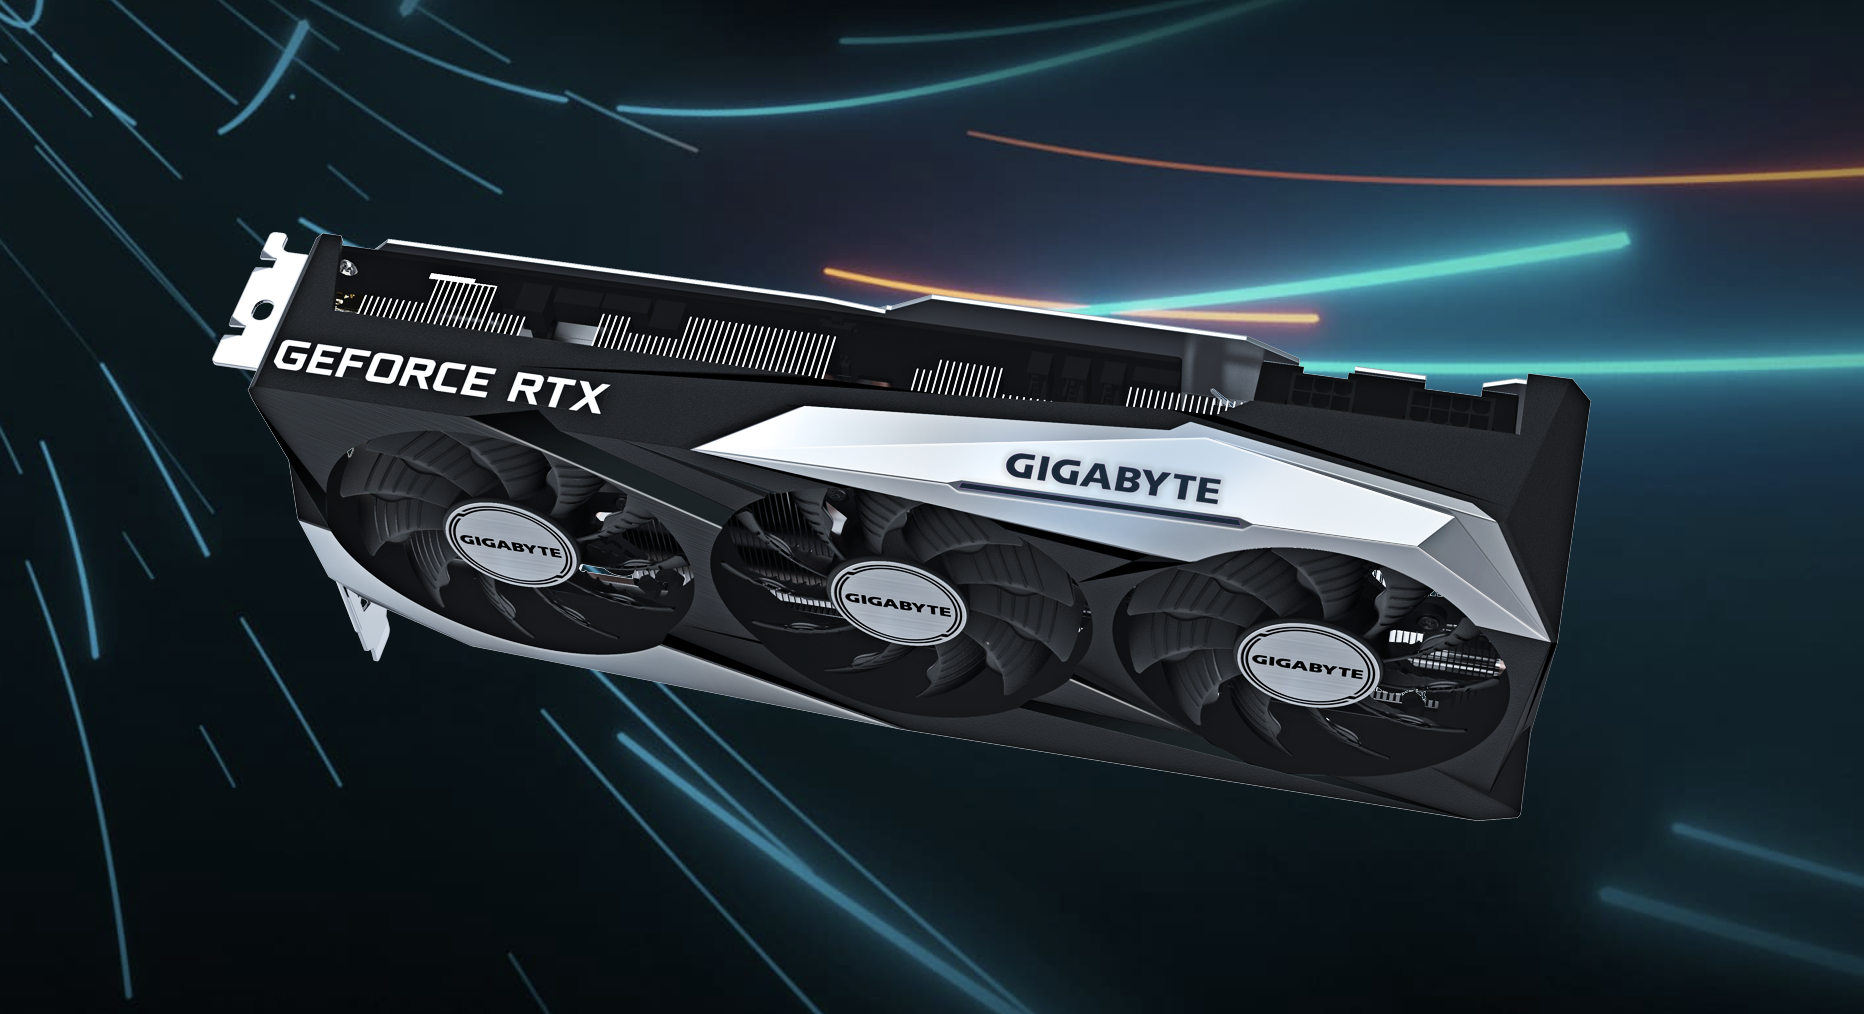 COLORFUL Unveils iGame GeForce RTX 4070 Ultra Z OC and RTX 4060 Ti Mini